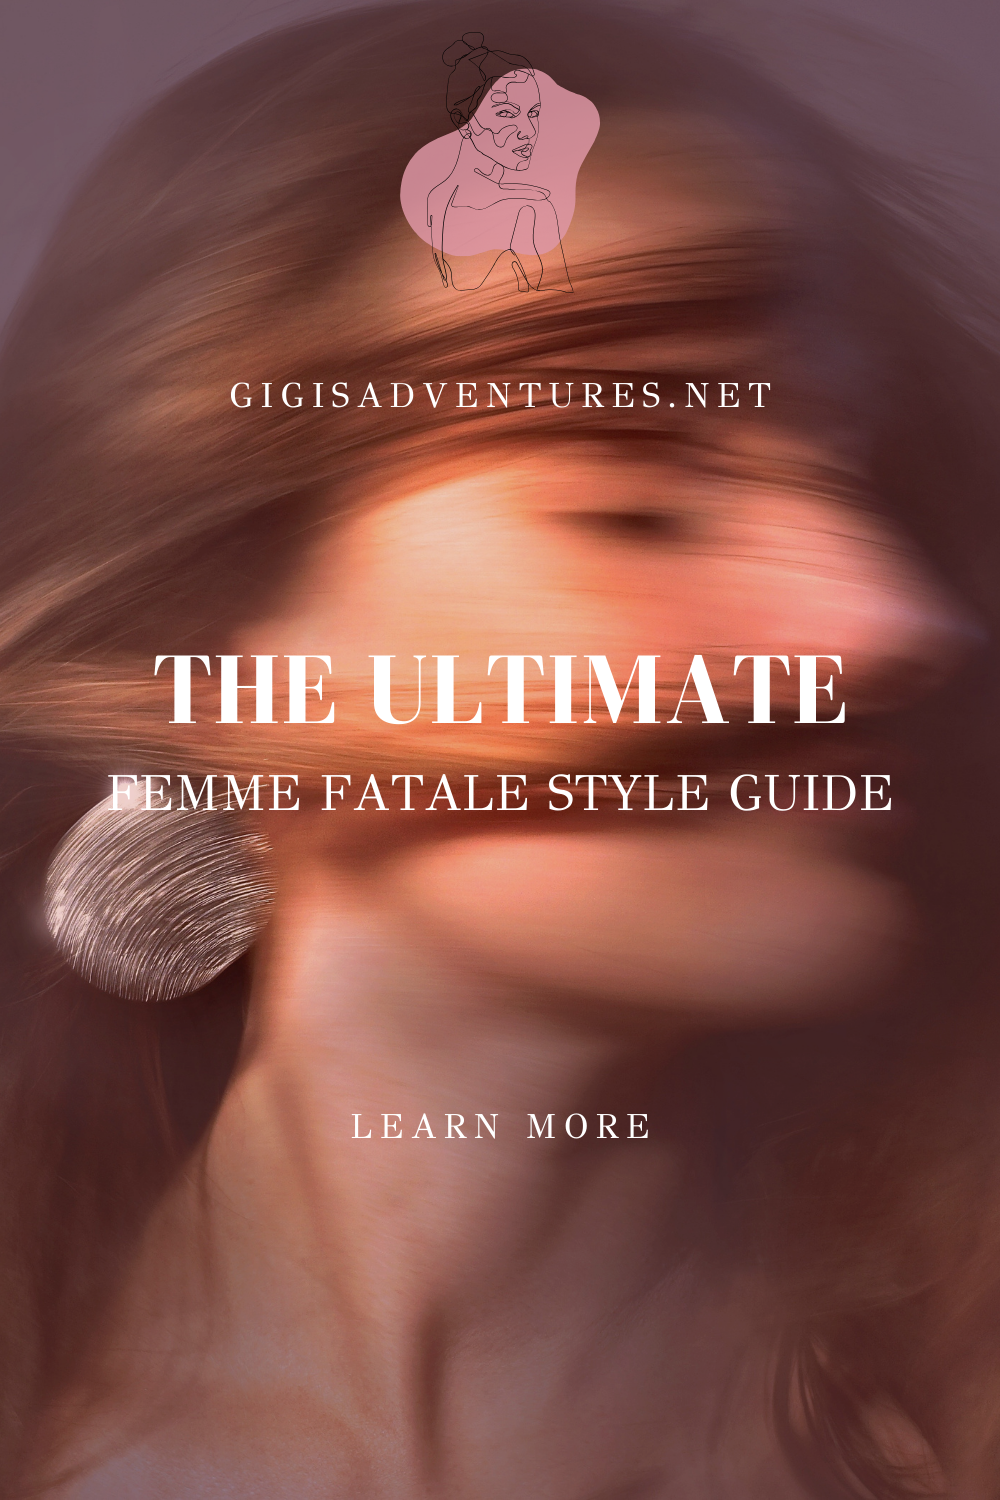 The Ultimate Femme Fatale Style Guide